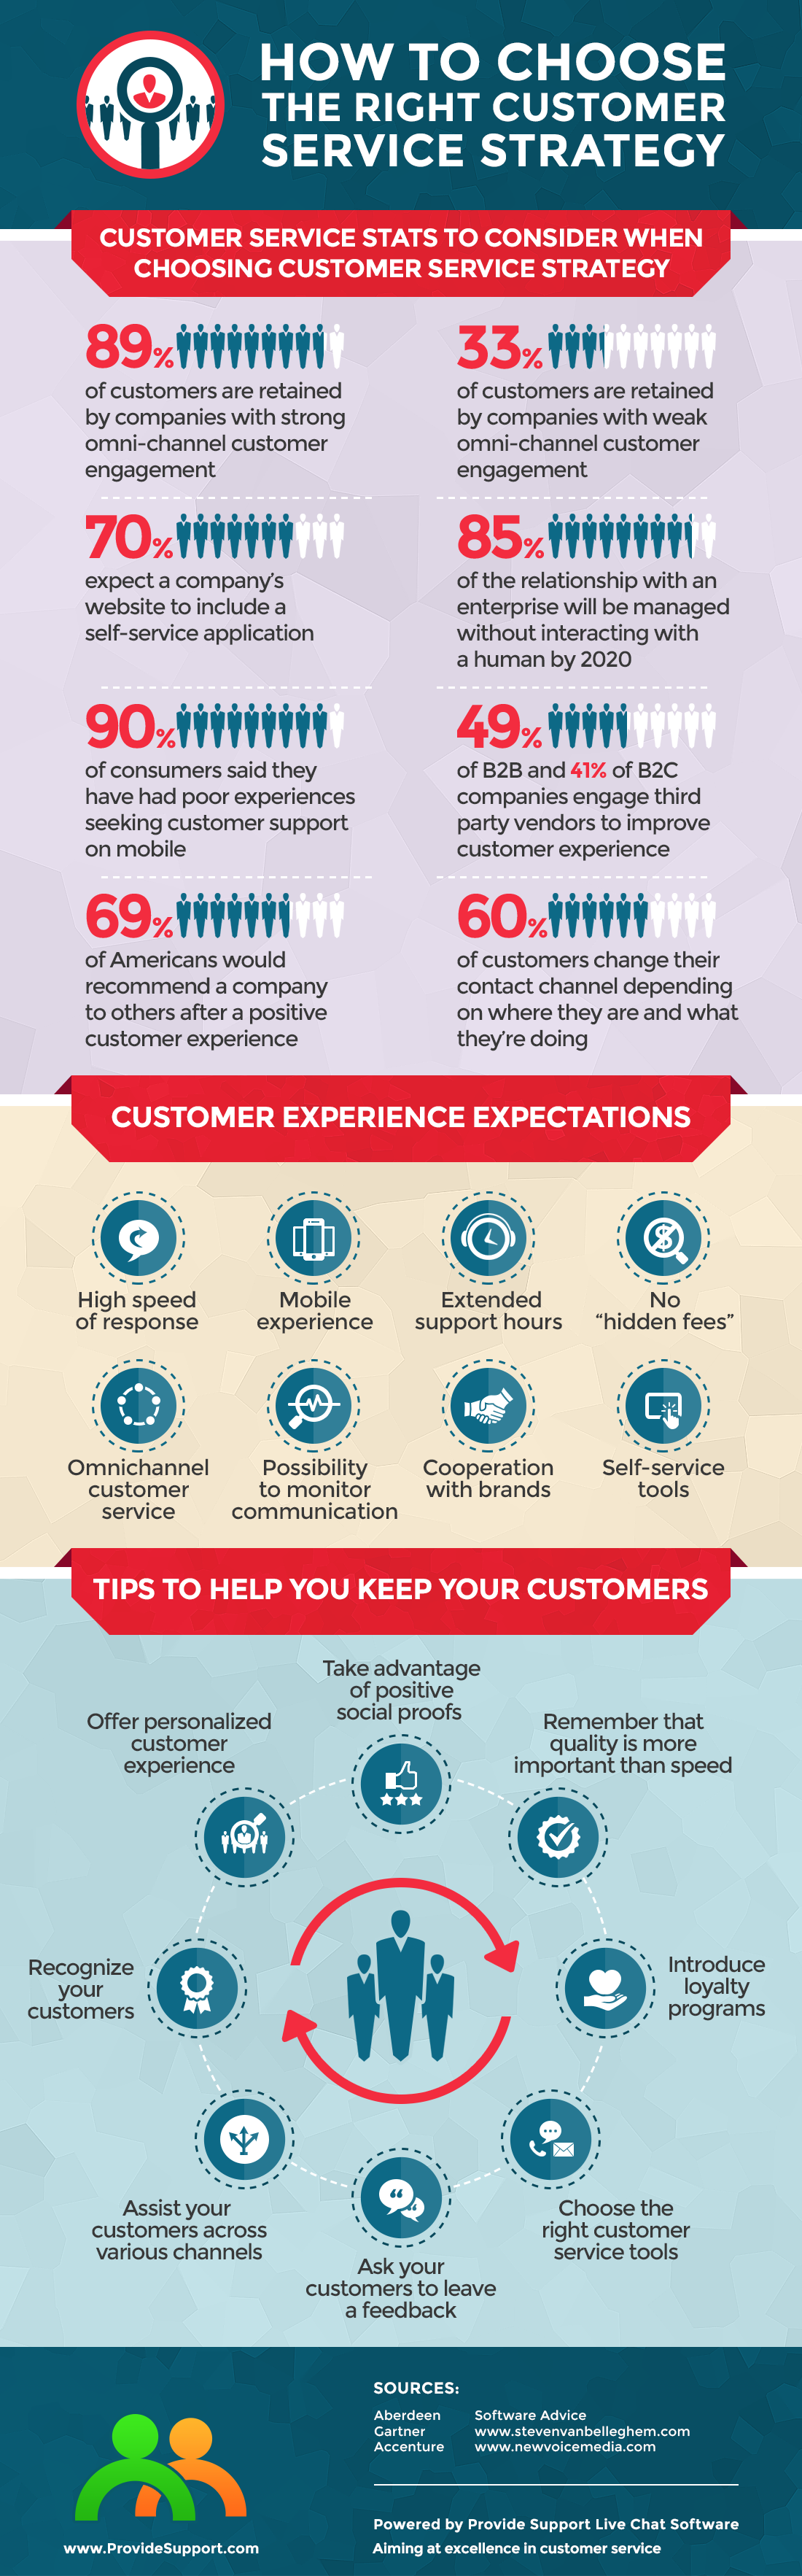 How to Choose the Right Customer Service Strategy